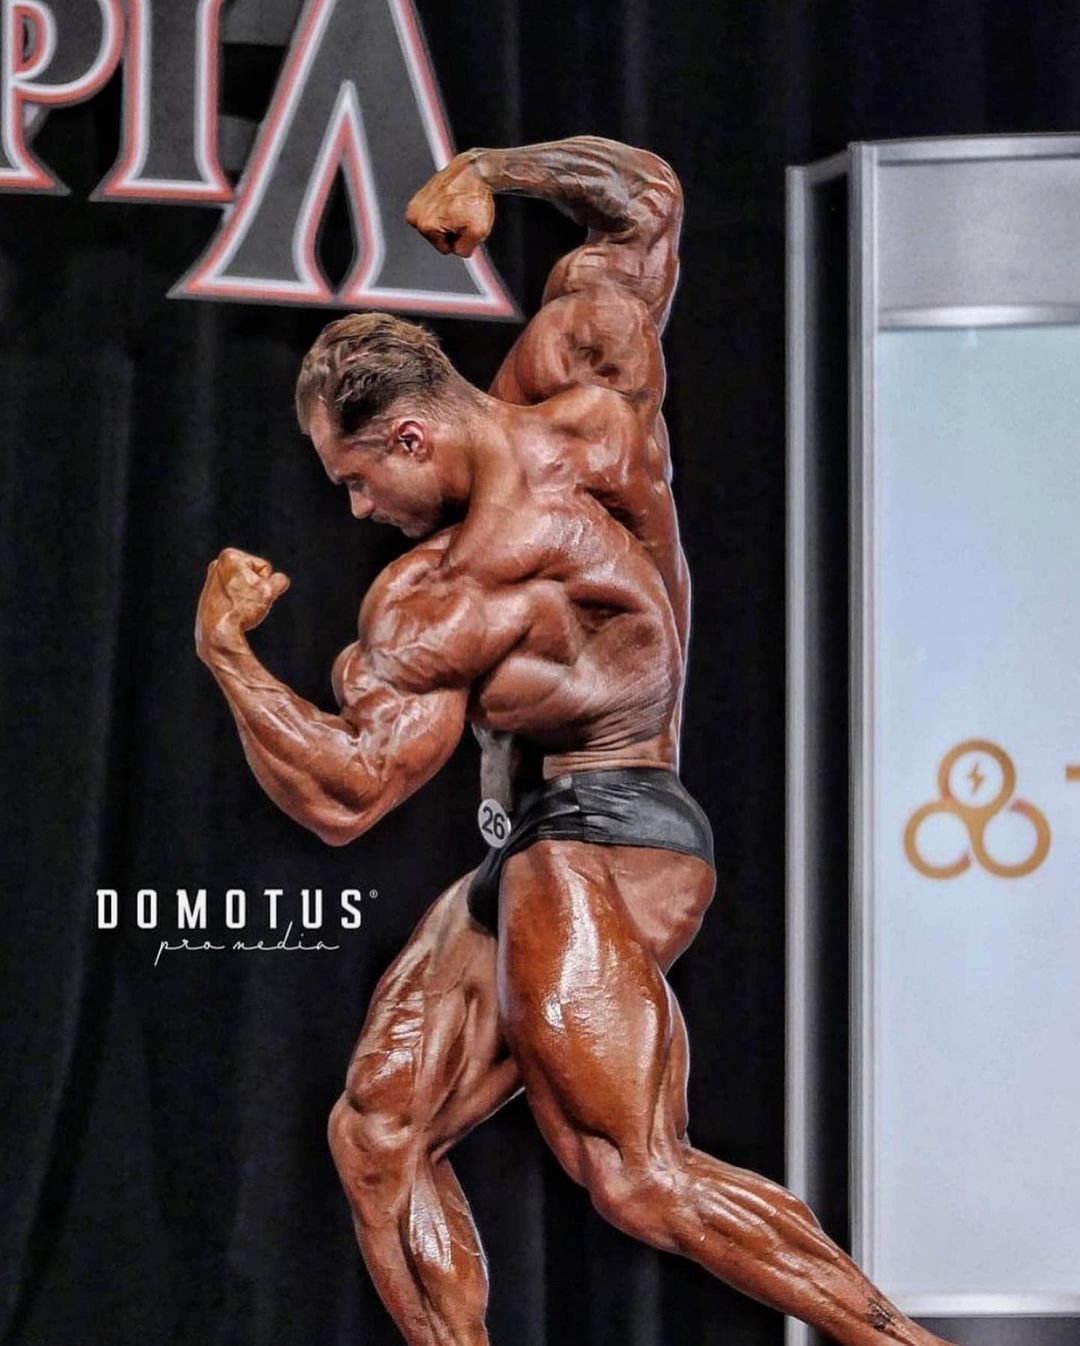 Chris Bumstead on Instagram: “And still